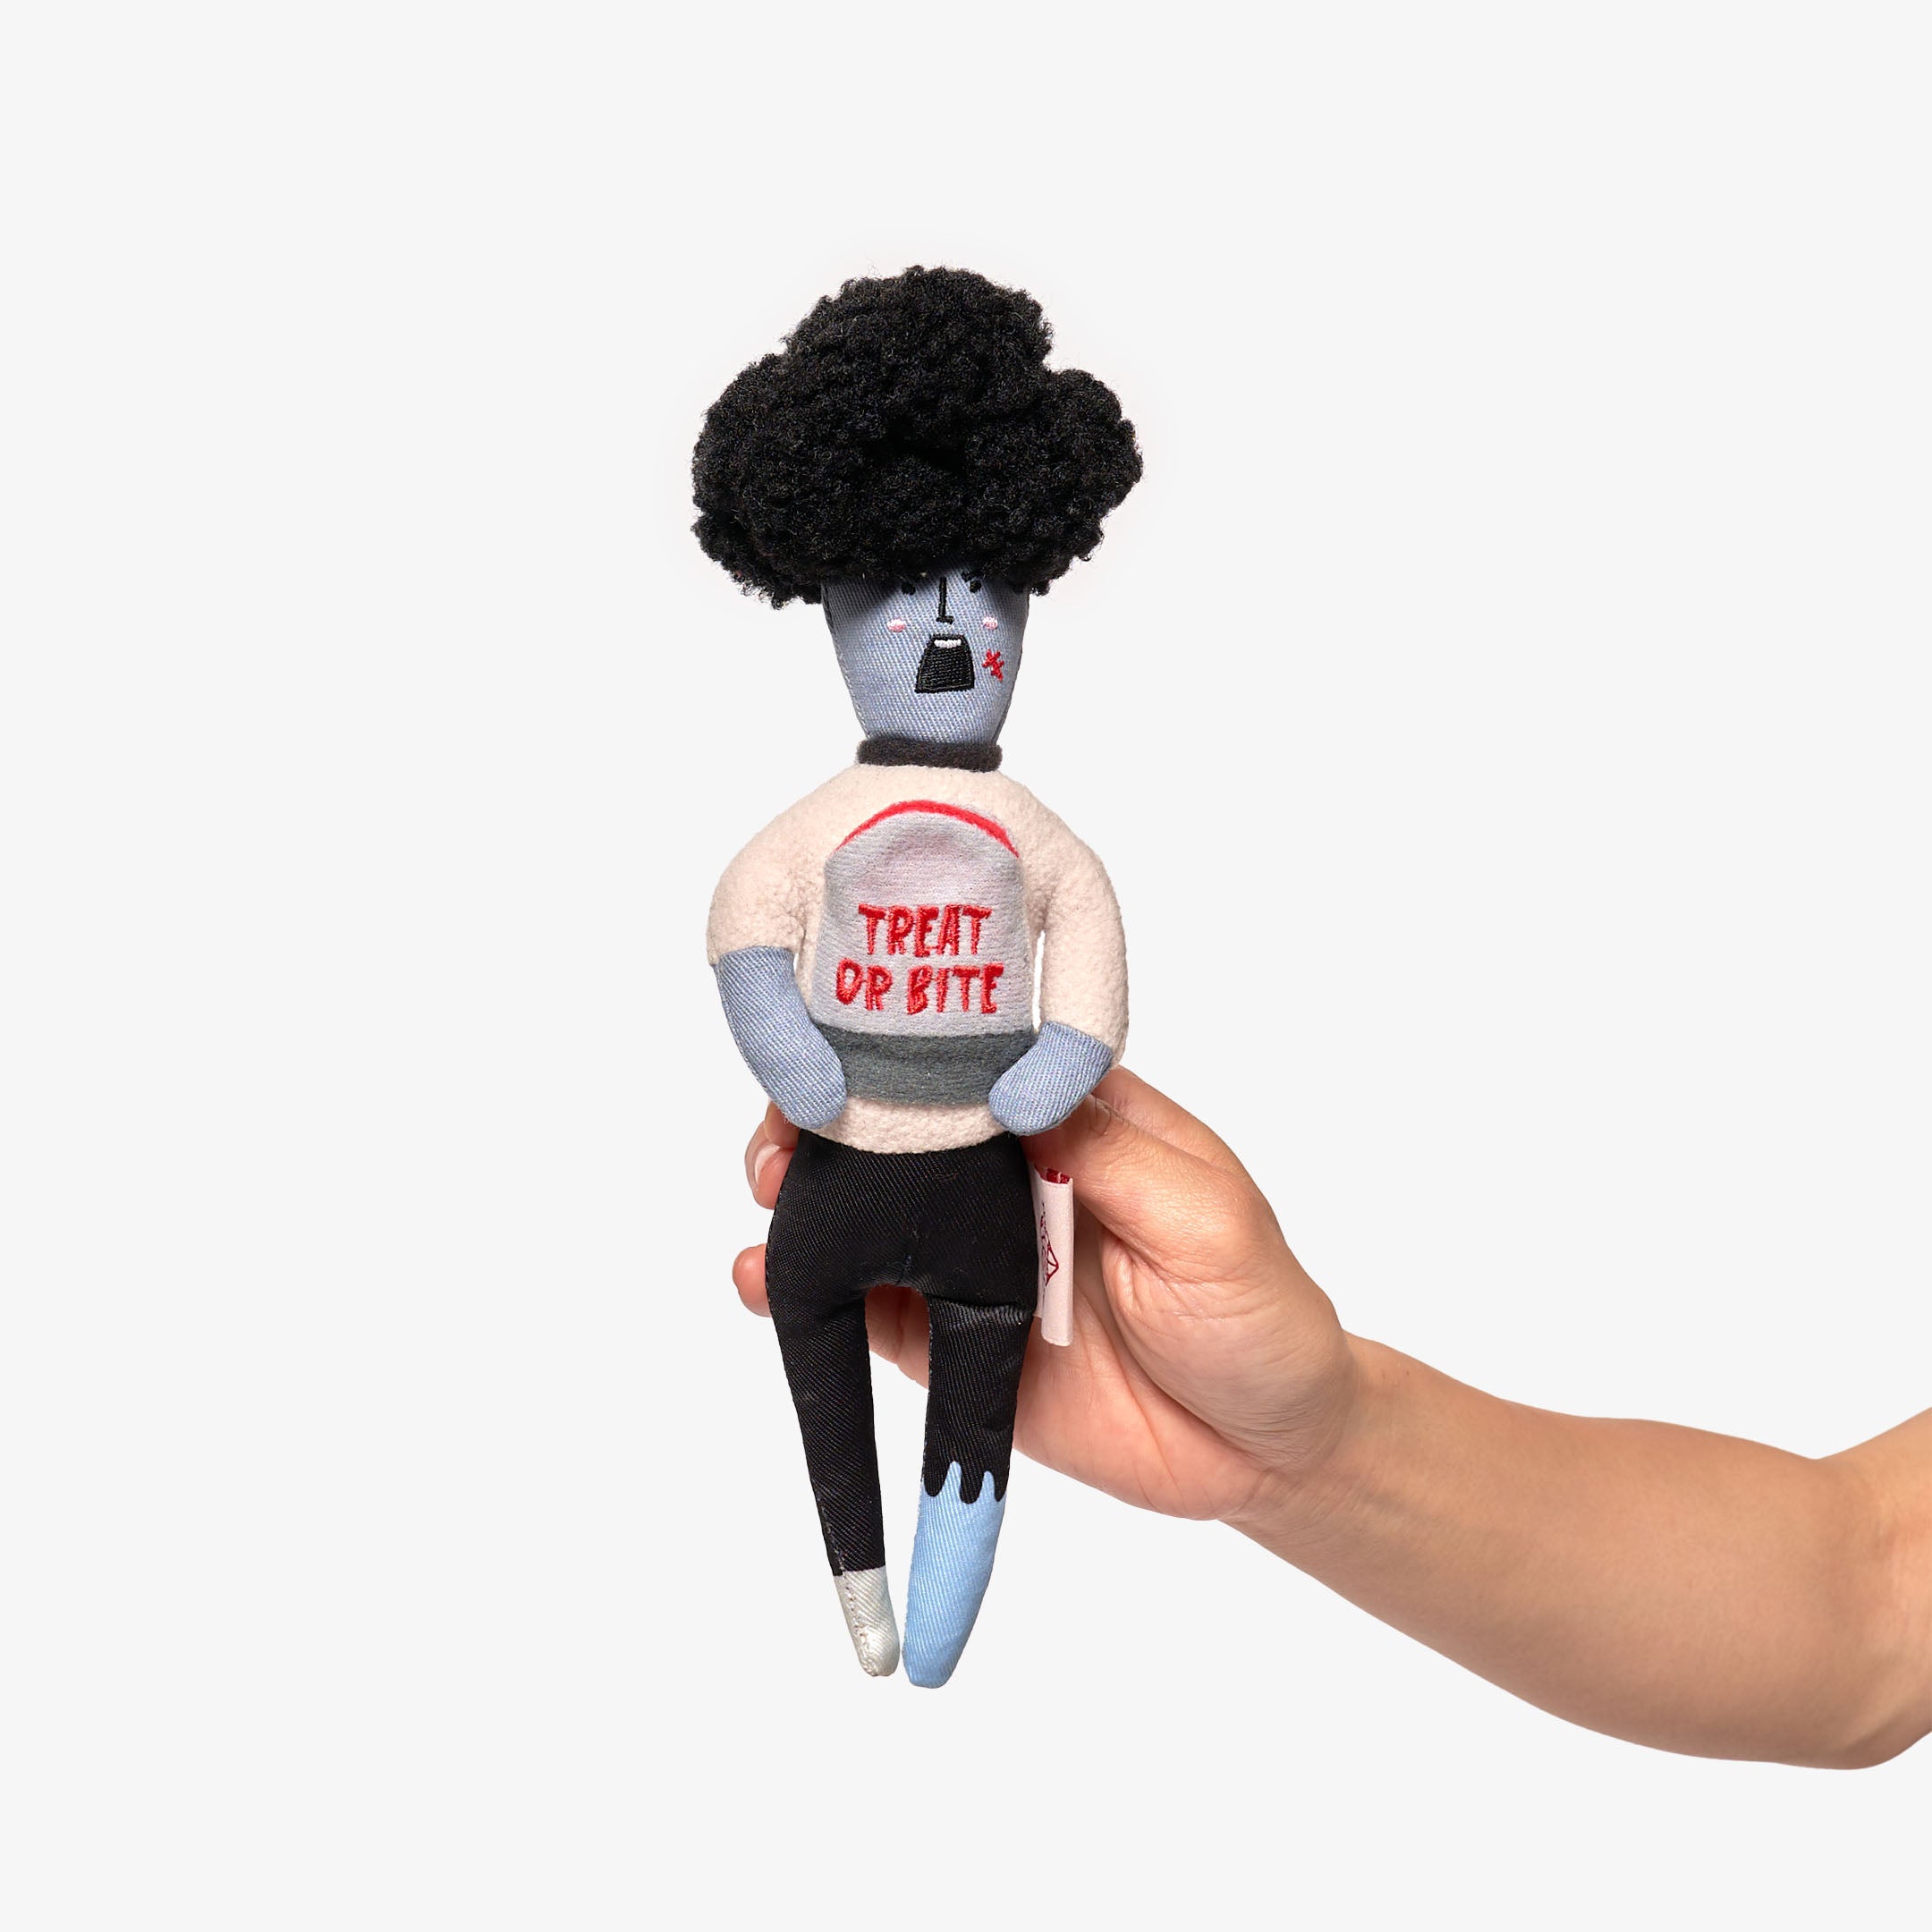 The image displays a hand holding a plush dog toy designed to resemble a zombie. The toy has a gray and blue body with a black, afro-style hairpiece and features the playful phrase "TREAT OR BITE" on its chest. This dog toy is intended for nosework, where treats can be hidden inside for pets to find, providing both mental stimulation and entertainment. The light background contrasts with the toy, highlighting its details and whimsical design.